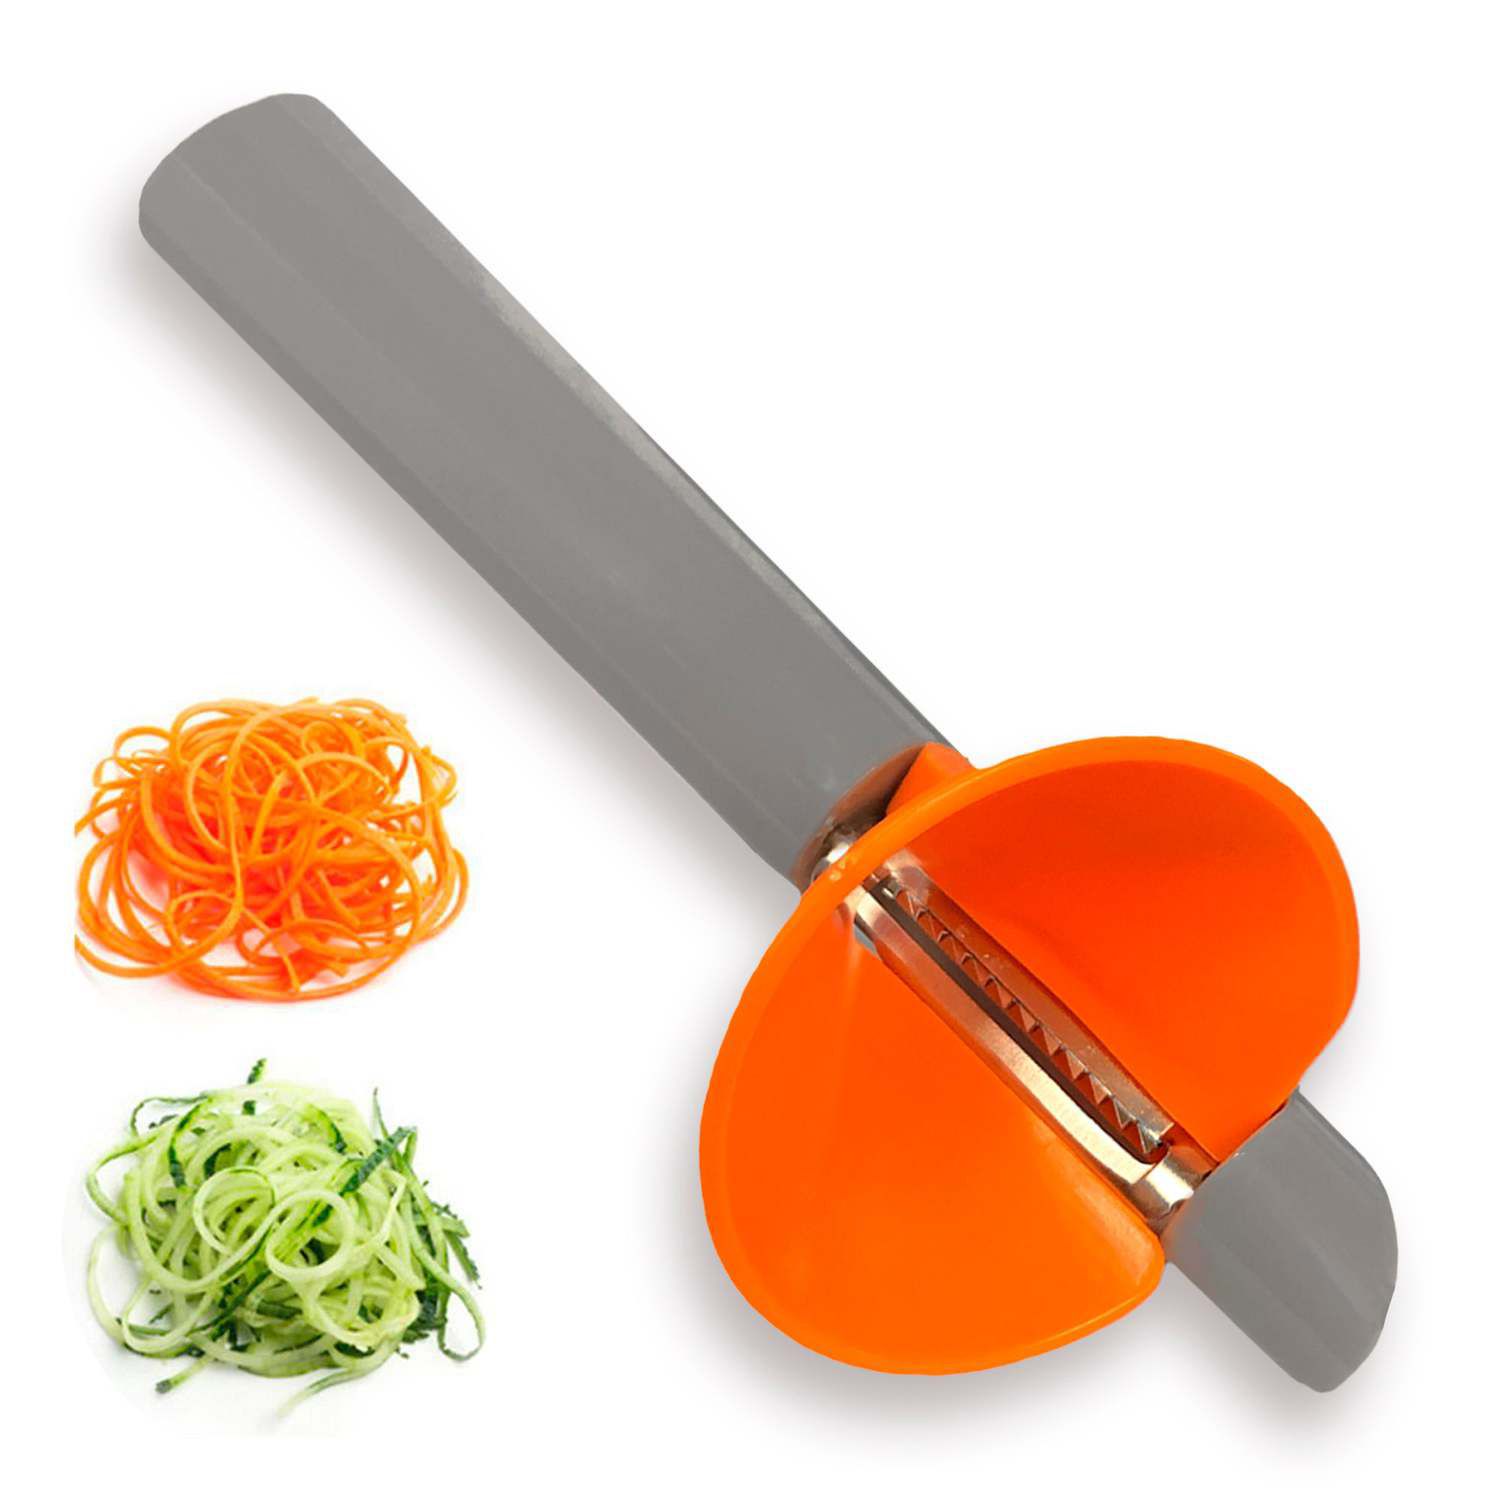 Kitchen Gadgets Set 5 Pieces, Space Saving Cooking Tools Cheese Grater, Bottle Opener, Fruit/Vegetable Peeler, Pizza Cutter, Garlic/Ginger Grinder, St